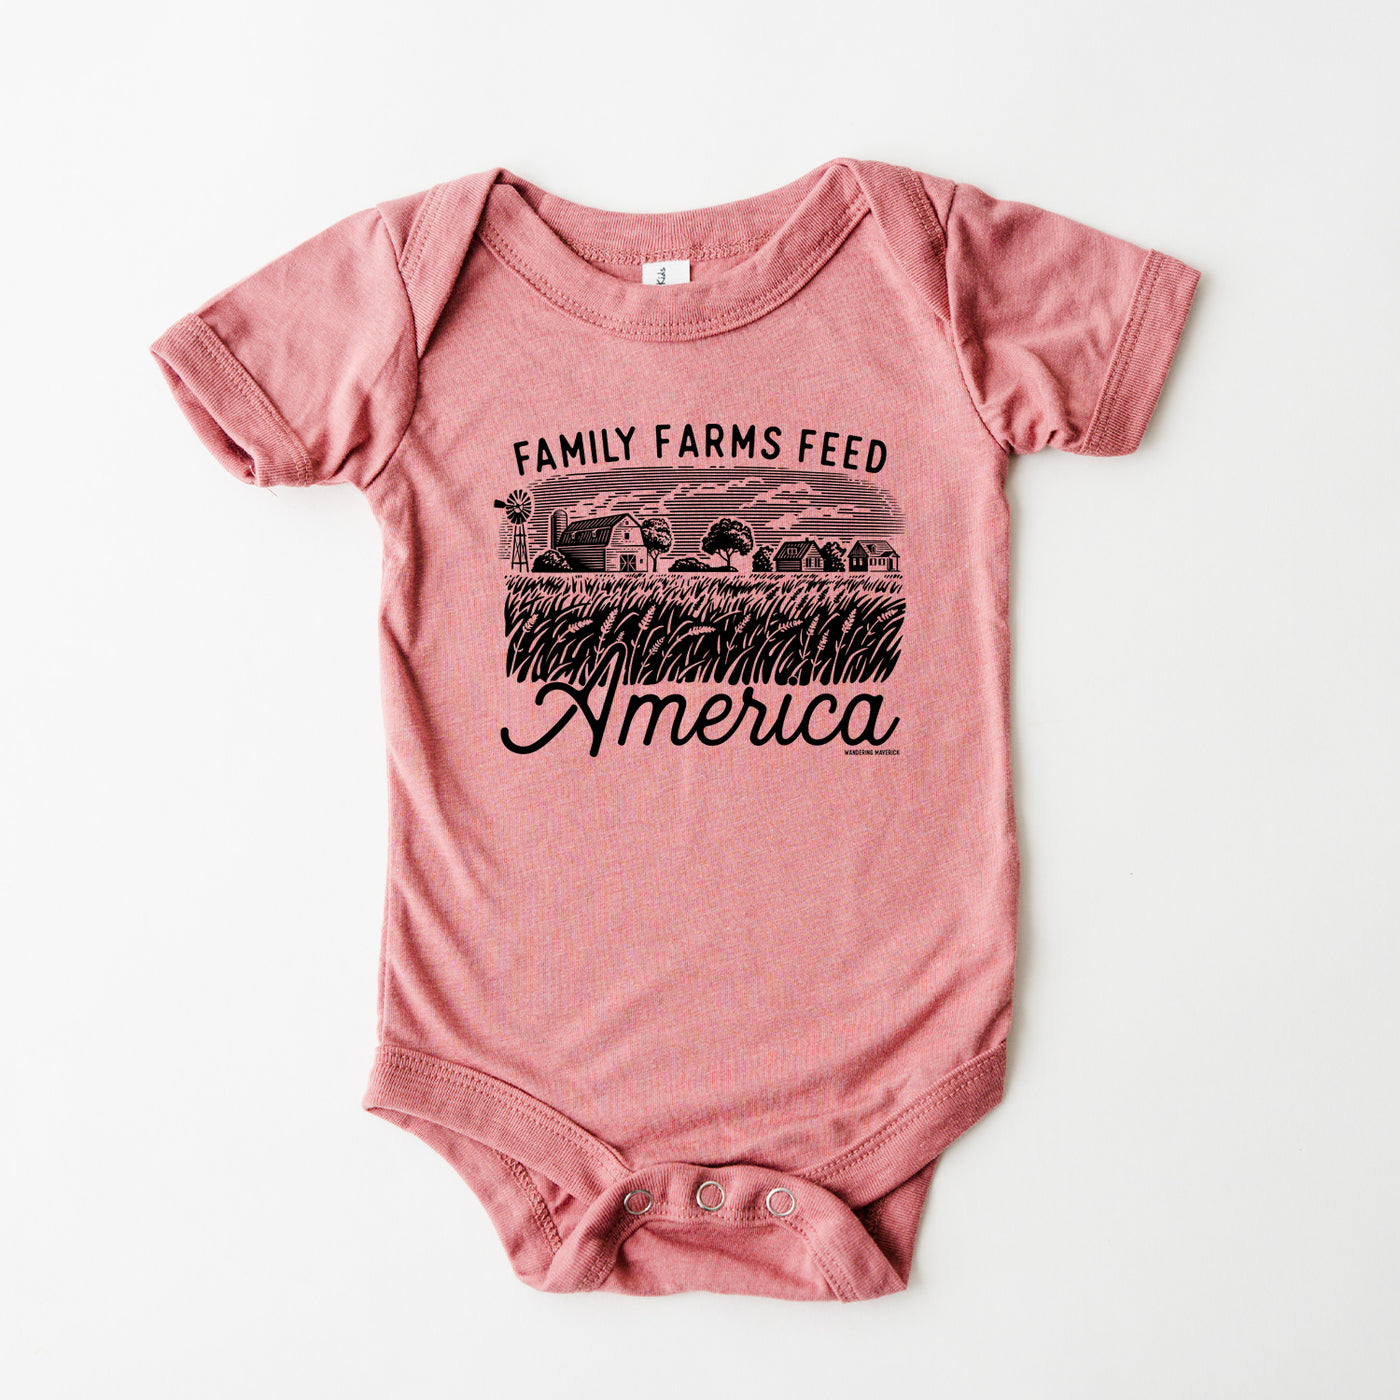 Family Farms Feed America One Piece/T-Shirt (Newborn - Youth XL) - Multiple Colors!